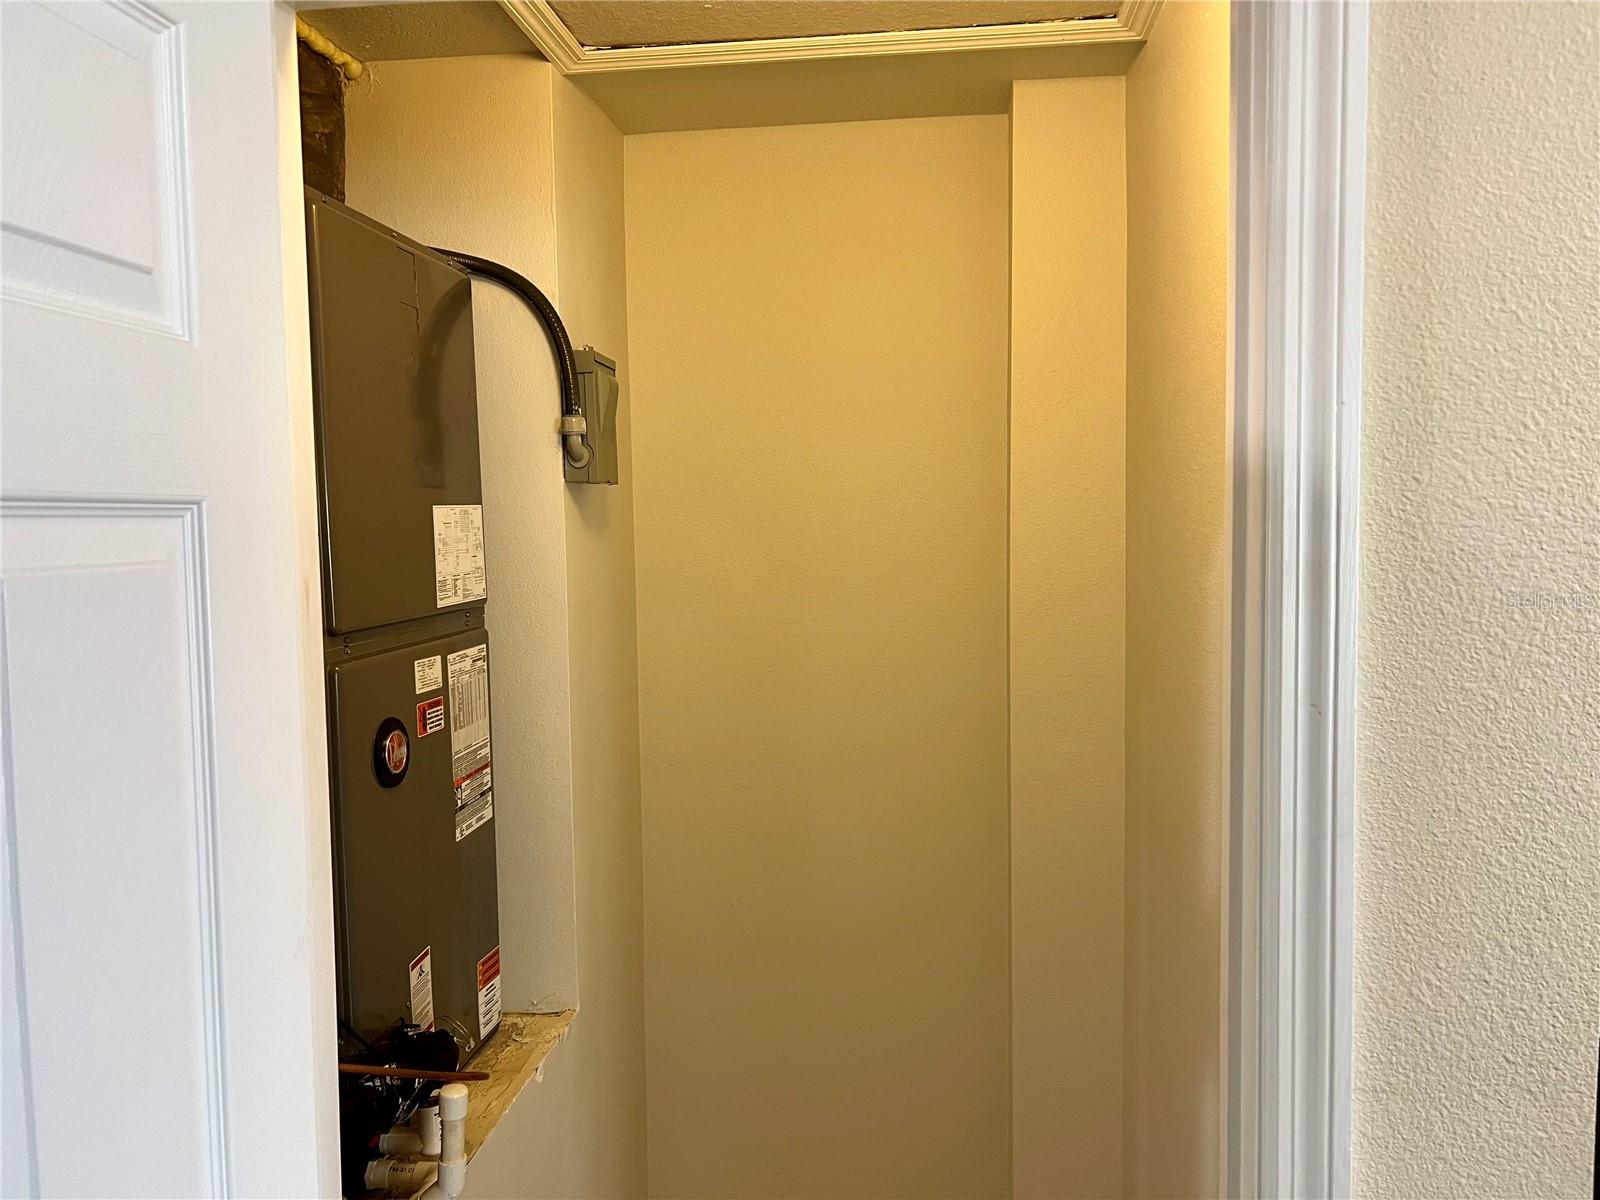 Utility closet that you can actually store in